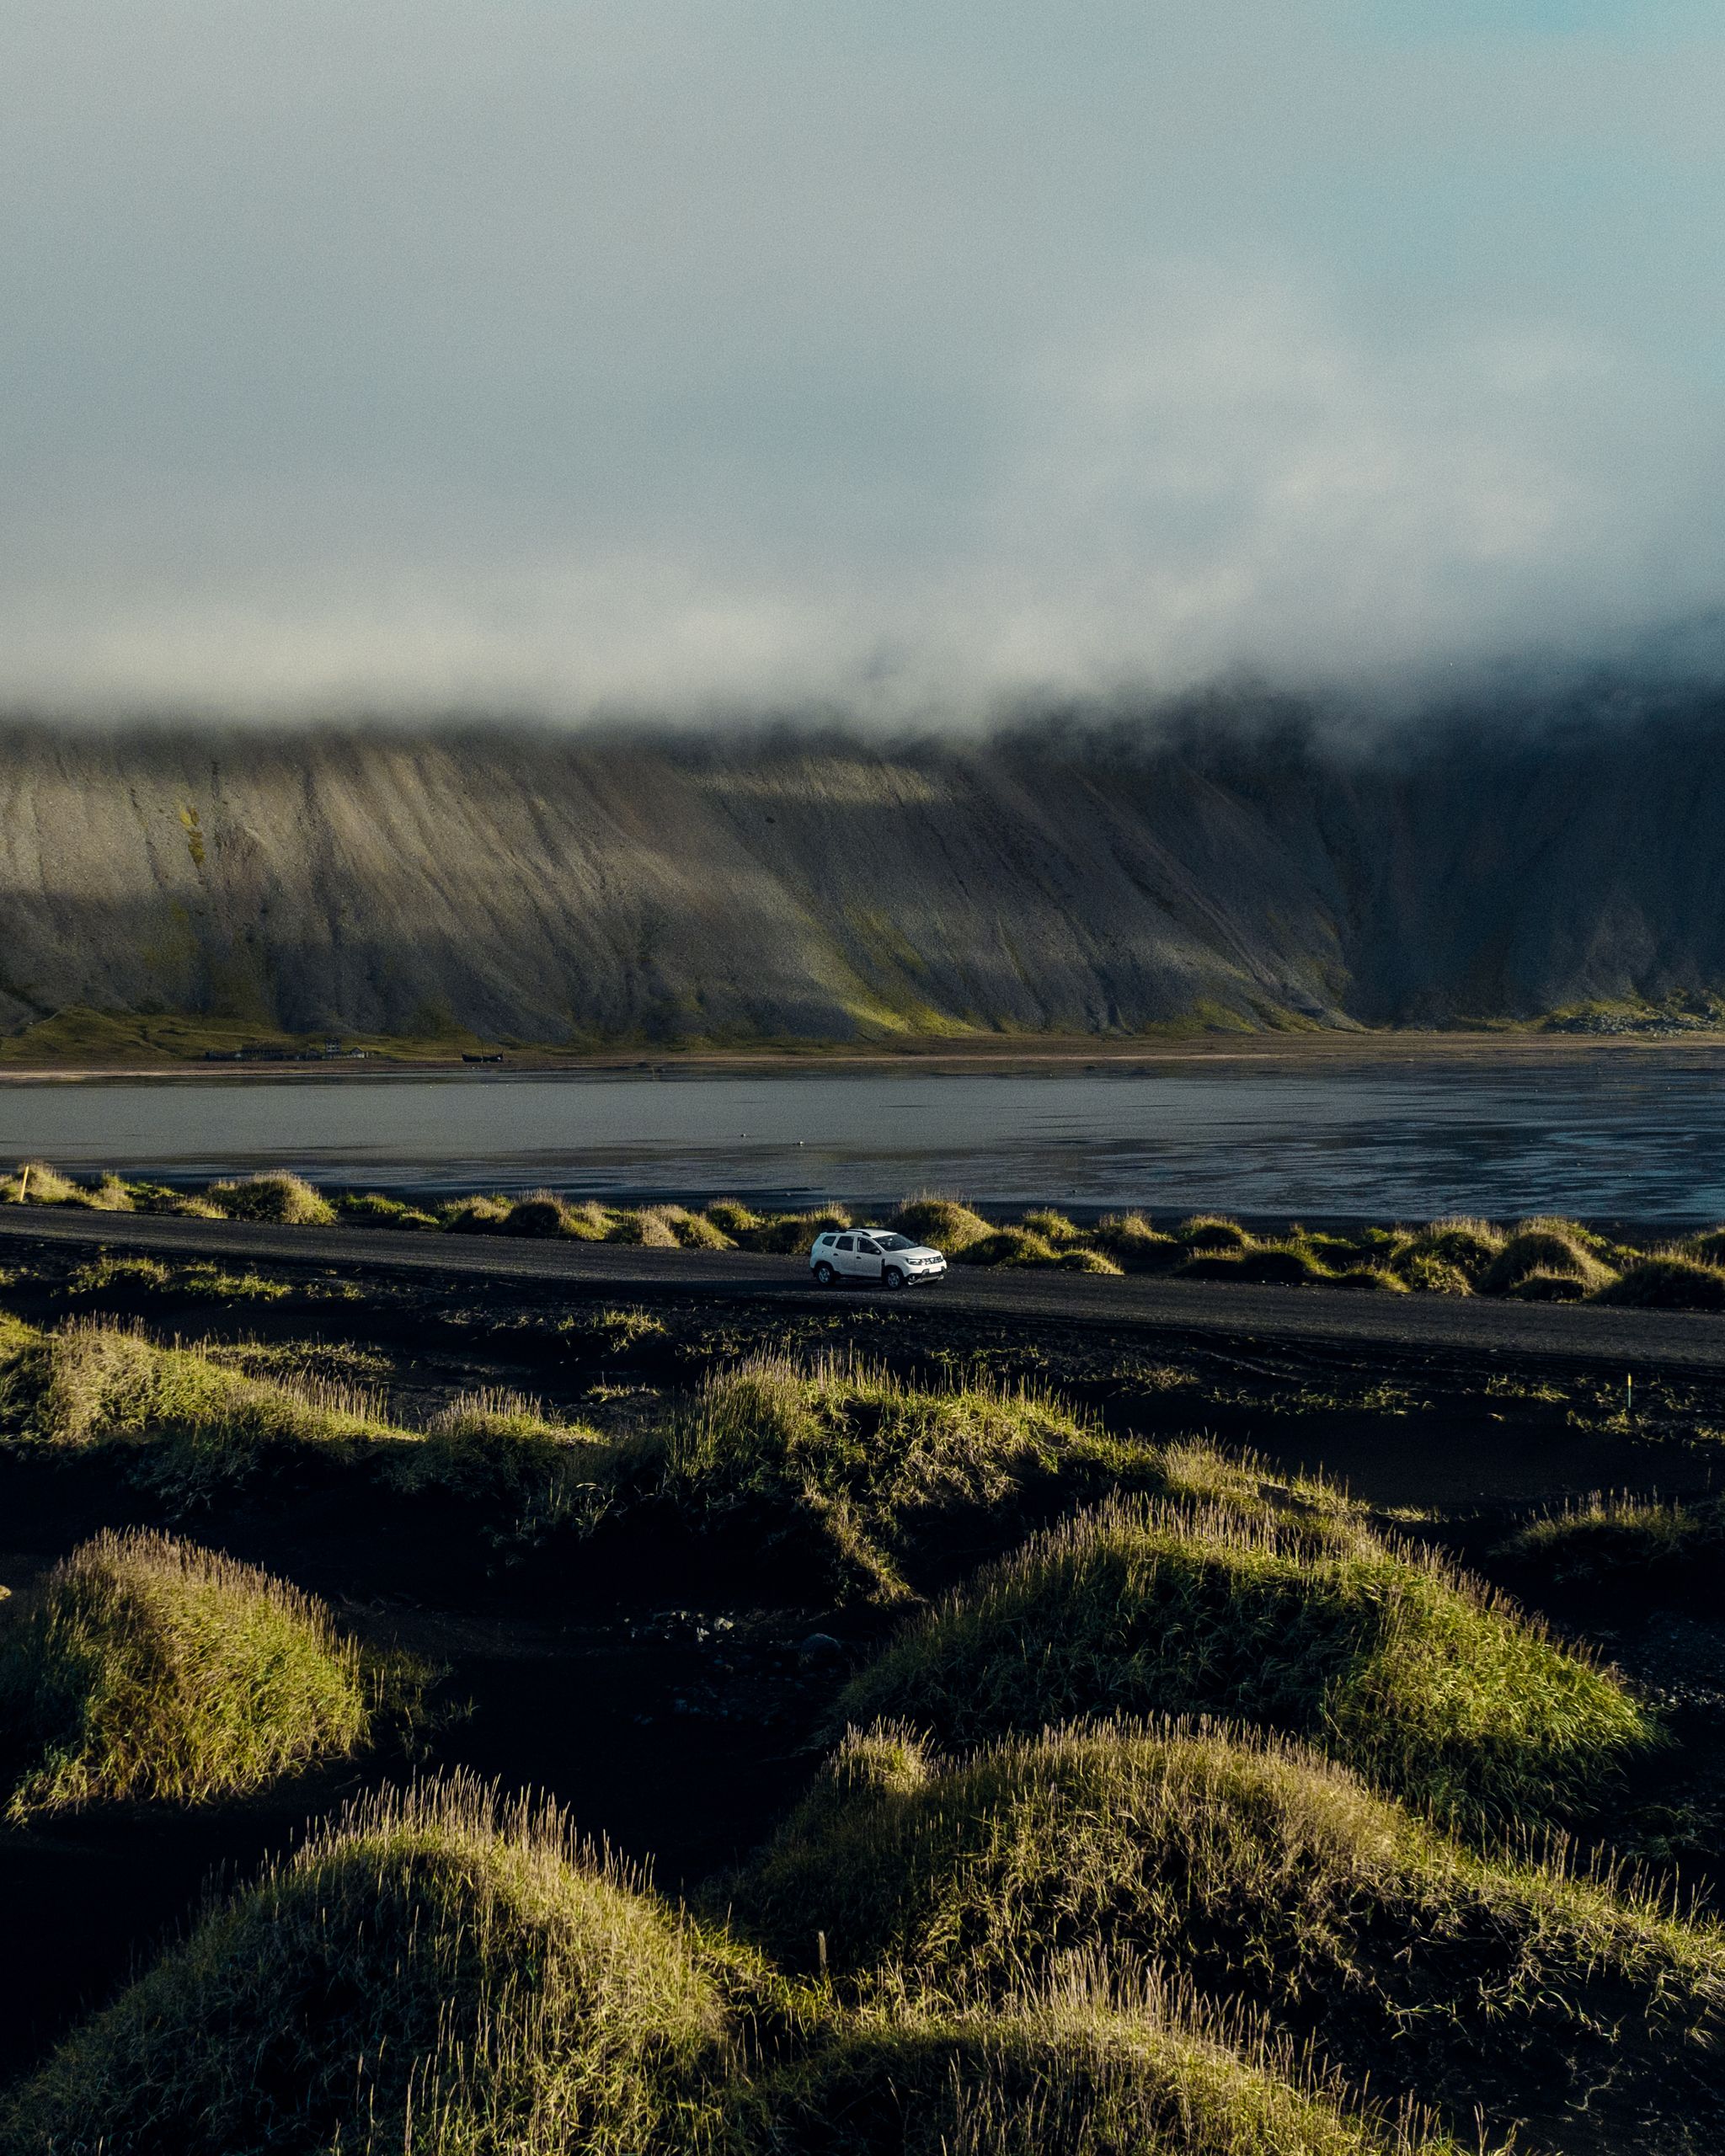 rental car on the road in Iceland in the middle of Icelandic landscapes (mountains, green plains and sea) 